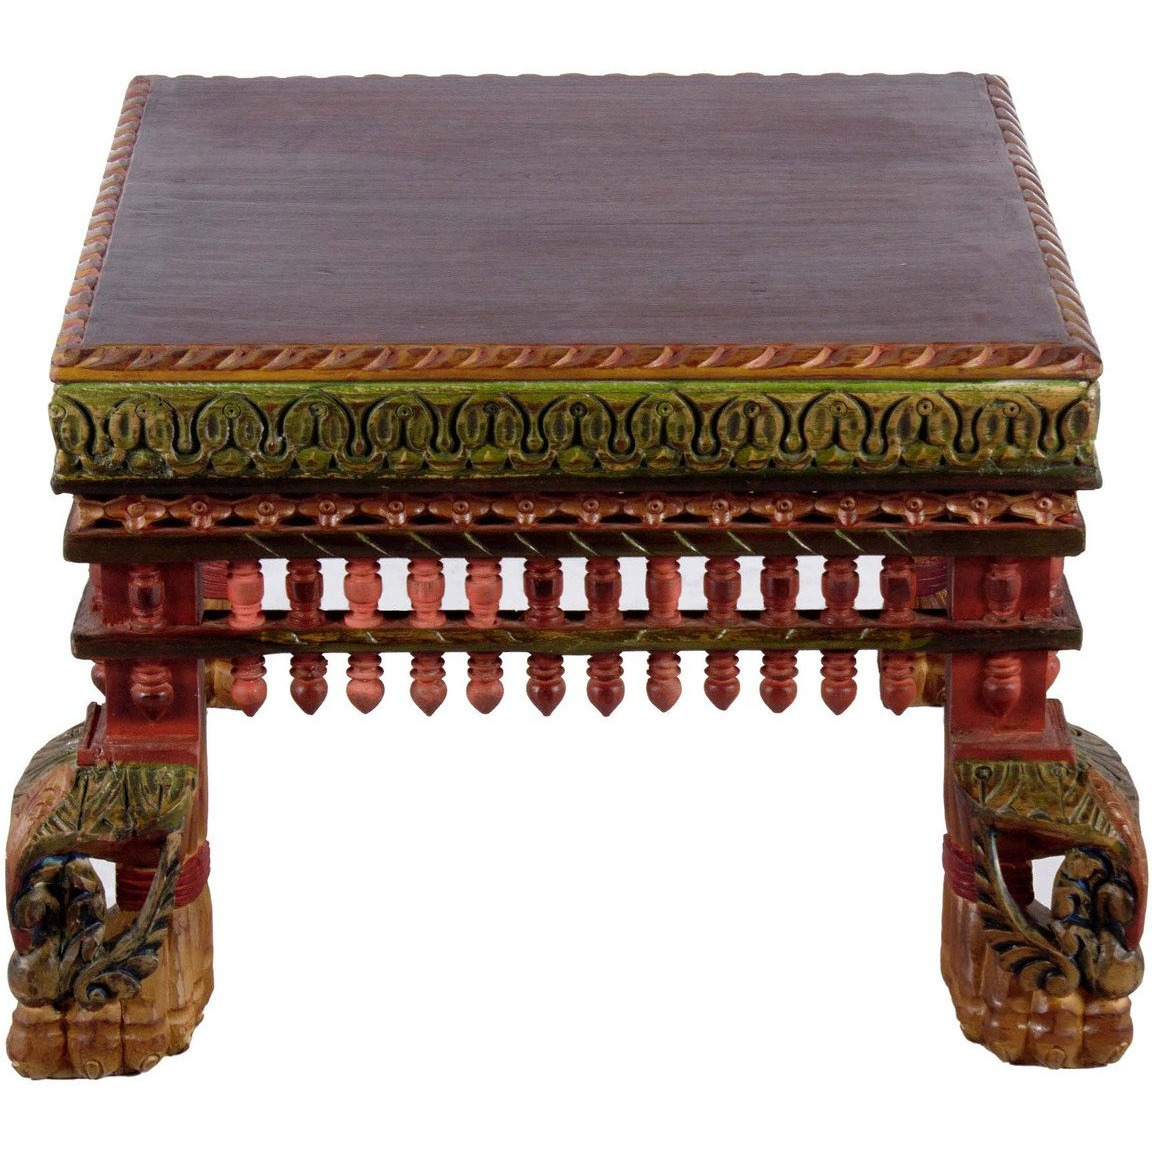 Wooden Carved Hand Painted  Table with peacock design legs